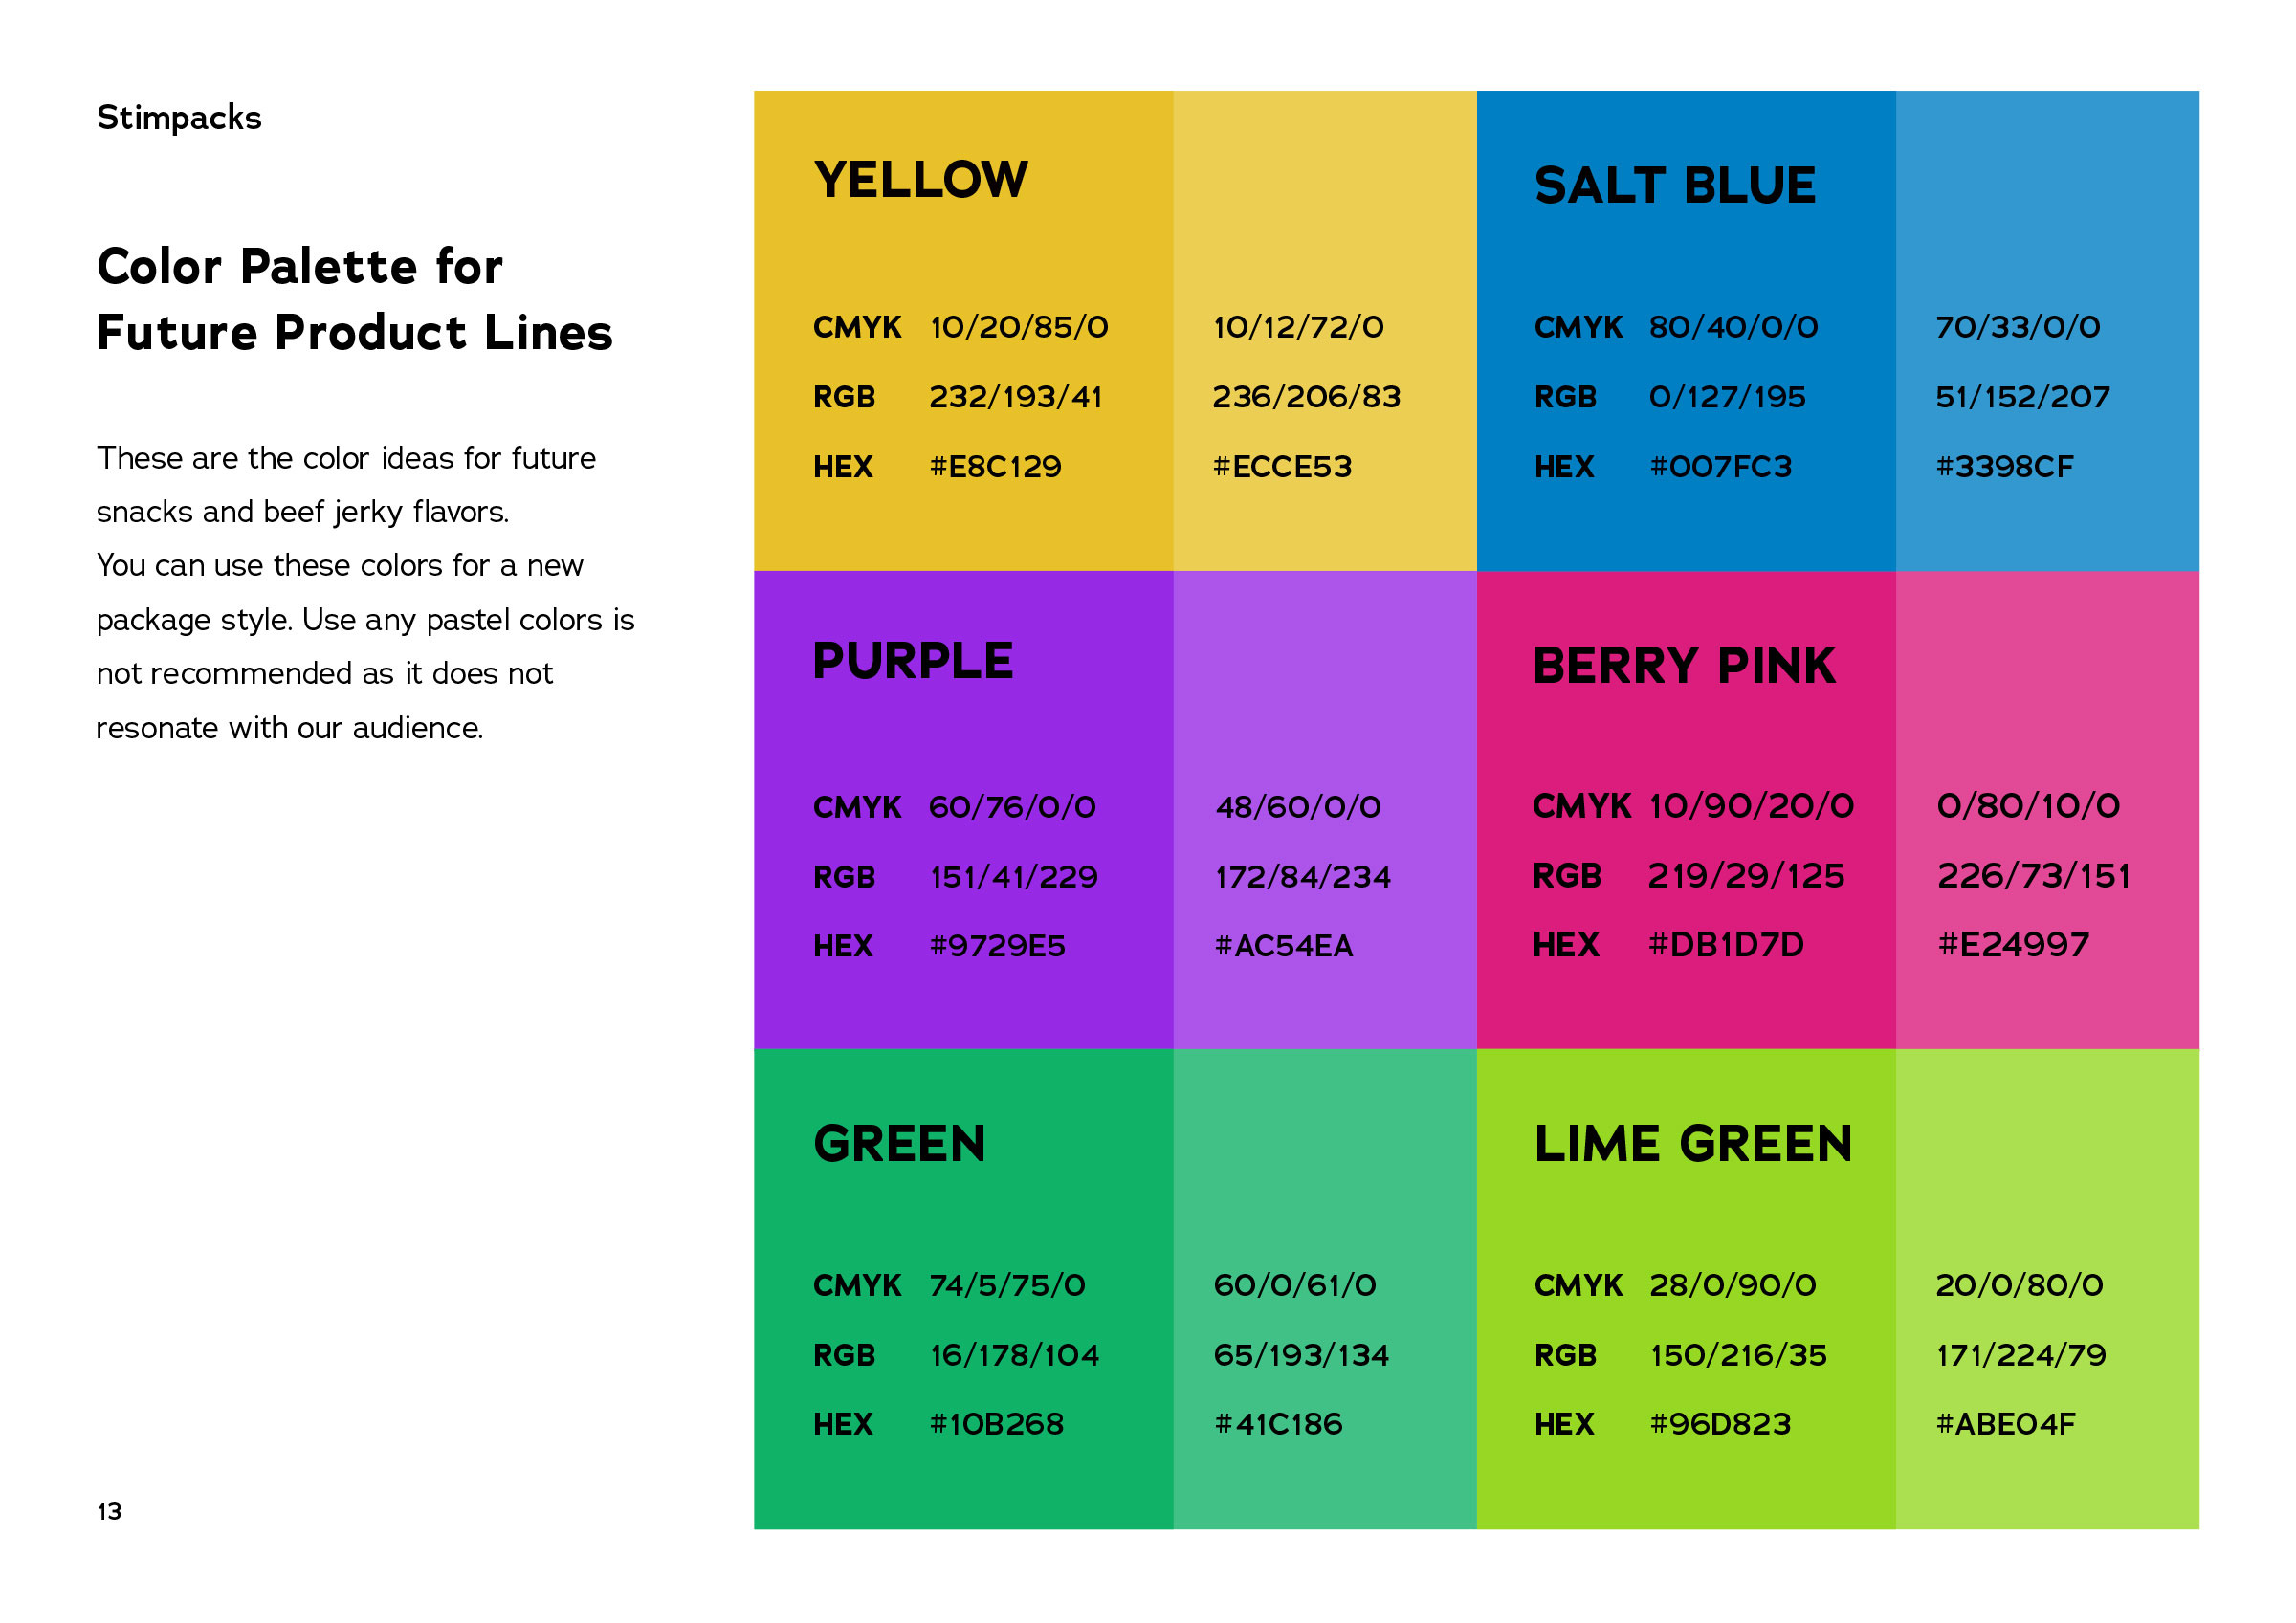 Color palette for future product lines